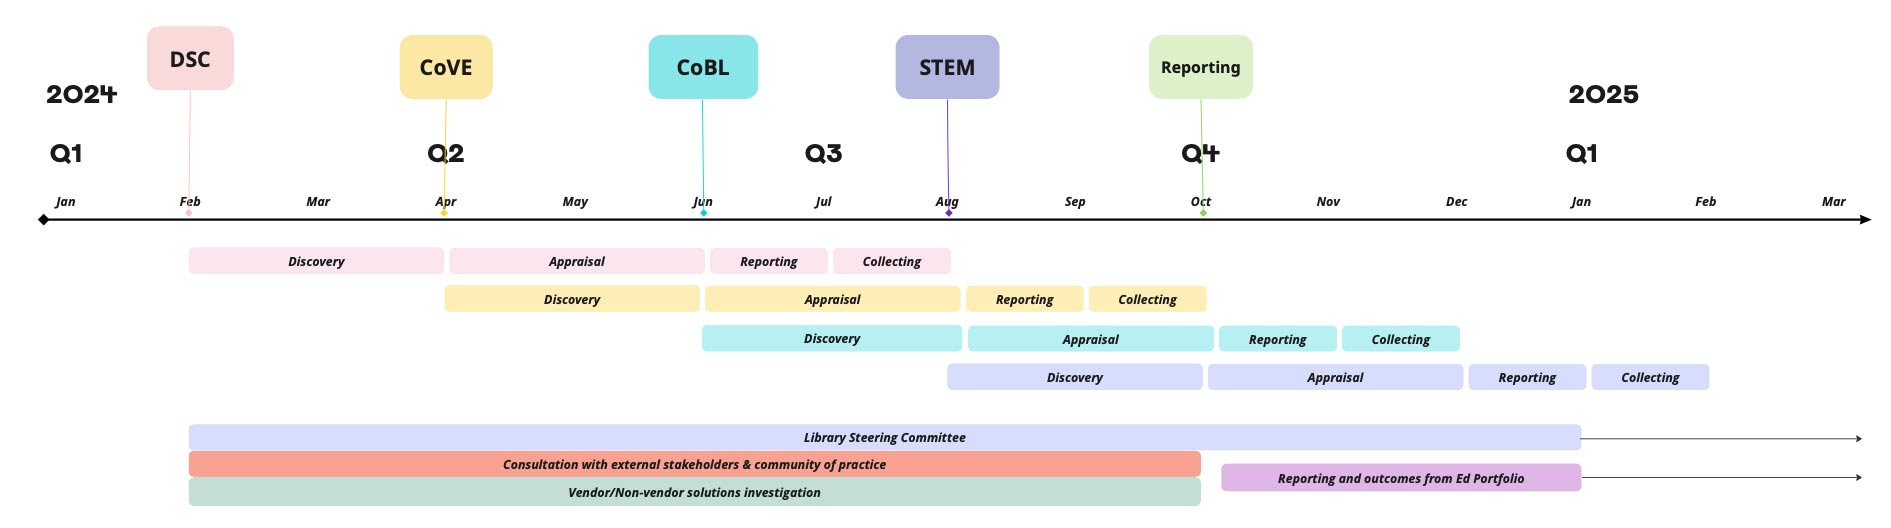 Timeline diagram of proposed work for 2024 showing staggered milestones across the year starting in February with DSC College and moving through CoVE, CoBL and STEM colleges each two months - covering discovery, appraisal, reporting and collection phases. Activities that span across most of the year are: engagement with internal and external stakeholders, establishment of a Library steering committee, and ongoing vendor and technical solution investigations.